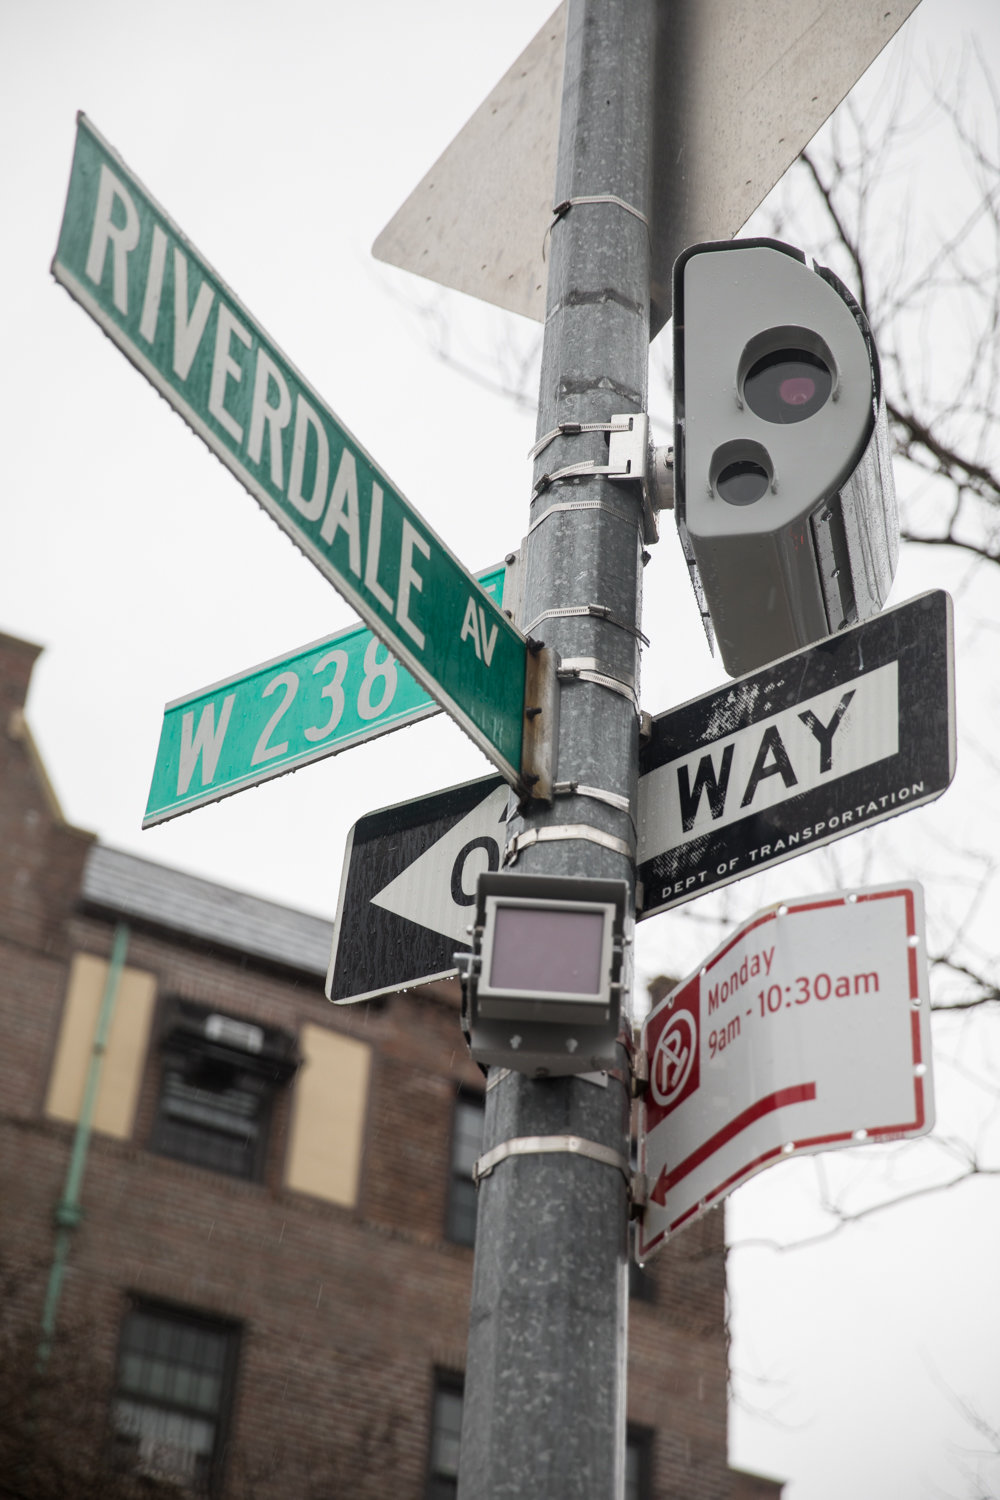 West 238th Street is staggered across Riverdale Avenue, but there’s one section where drivers will have to be more careful than usual, because city officials have installed a new speed camera.